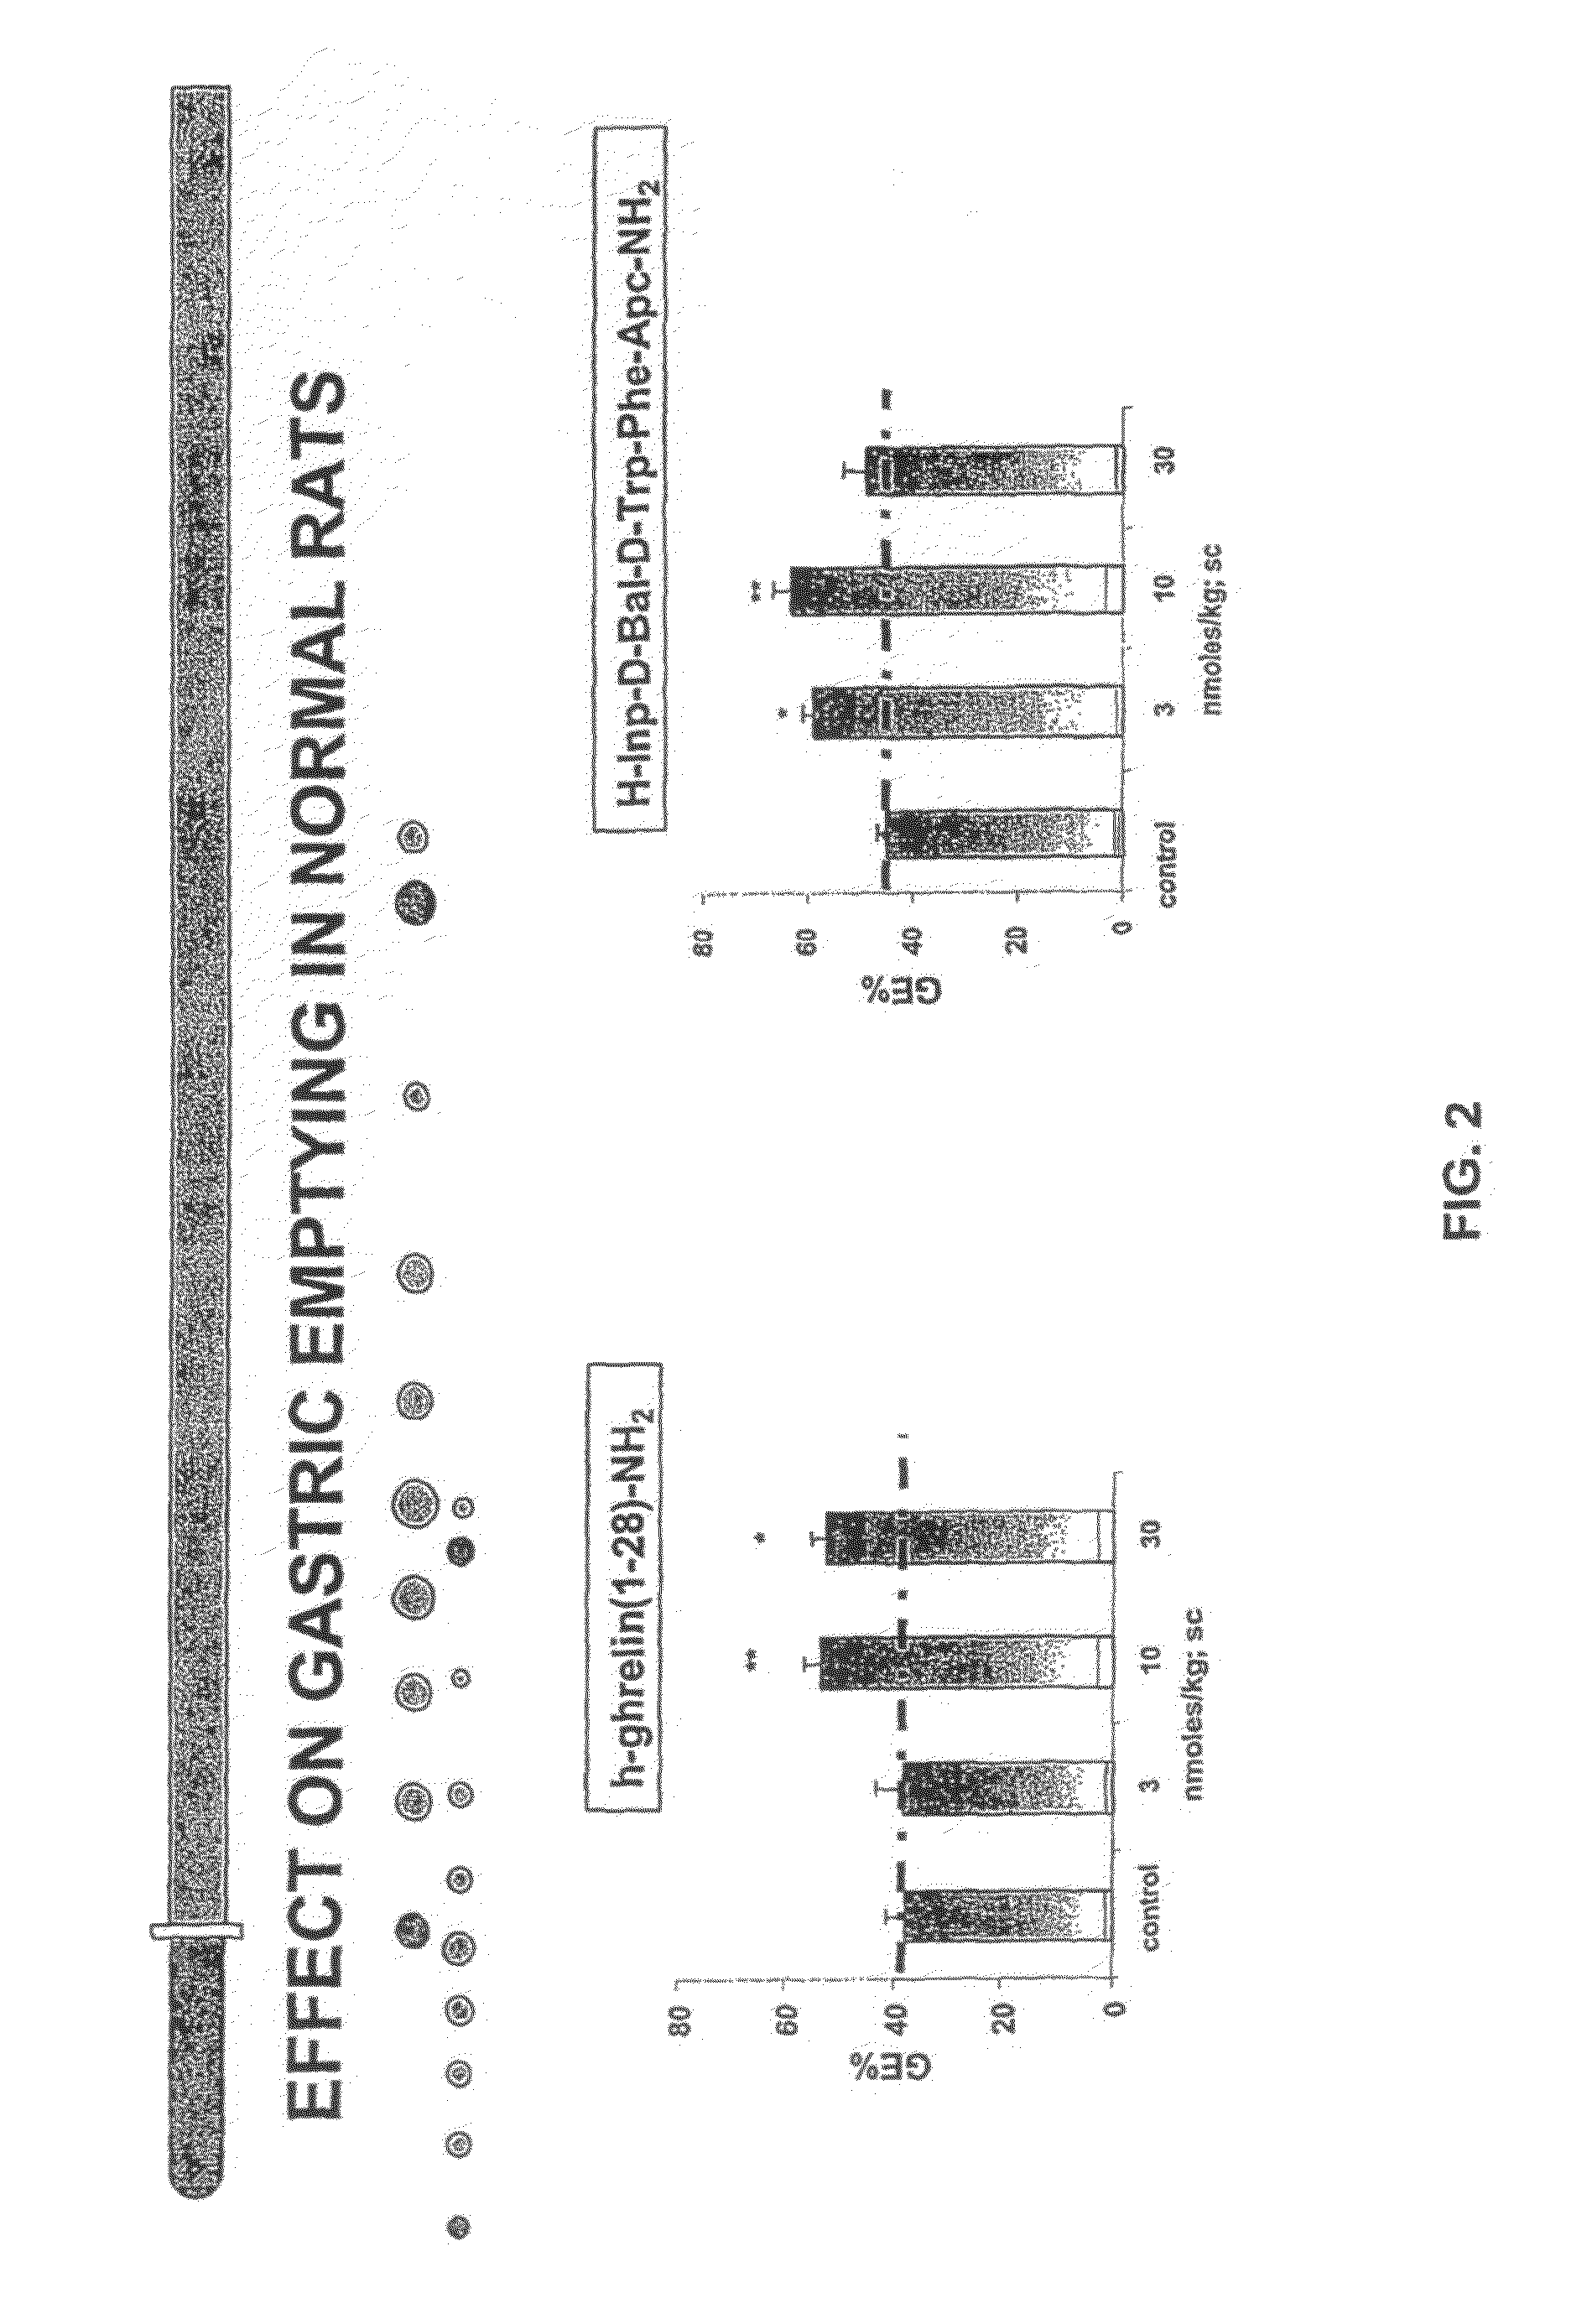 Compositions and methods for stimulating gastrointestinal motility